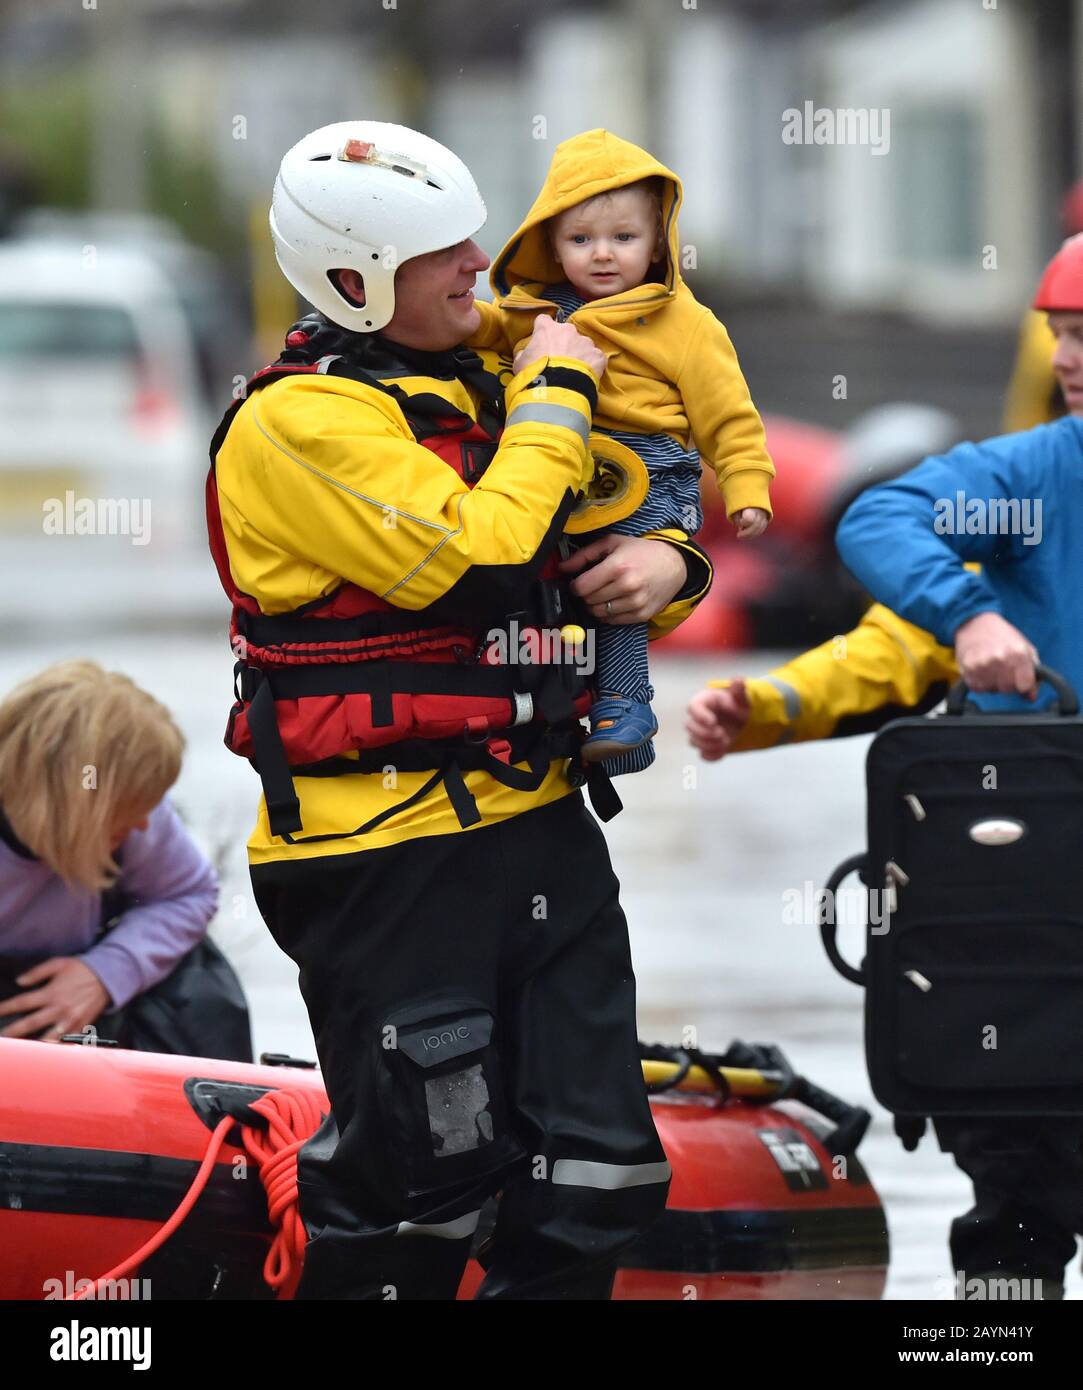 One-year-old Blake is carried by a rescue worker as emergency services continue to take families to safety, after flooding in Nantgarw, Wales, as Storm Dennis hit the UK. Stock Photo